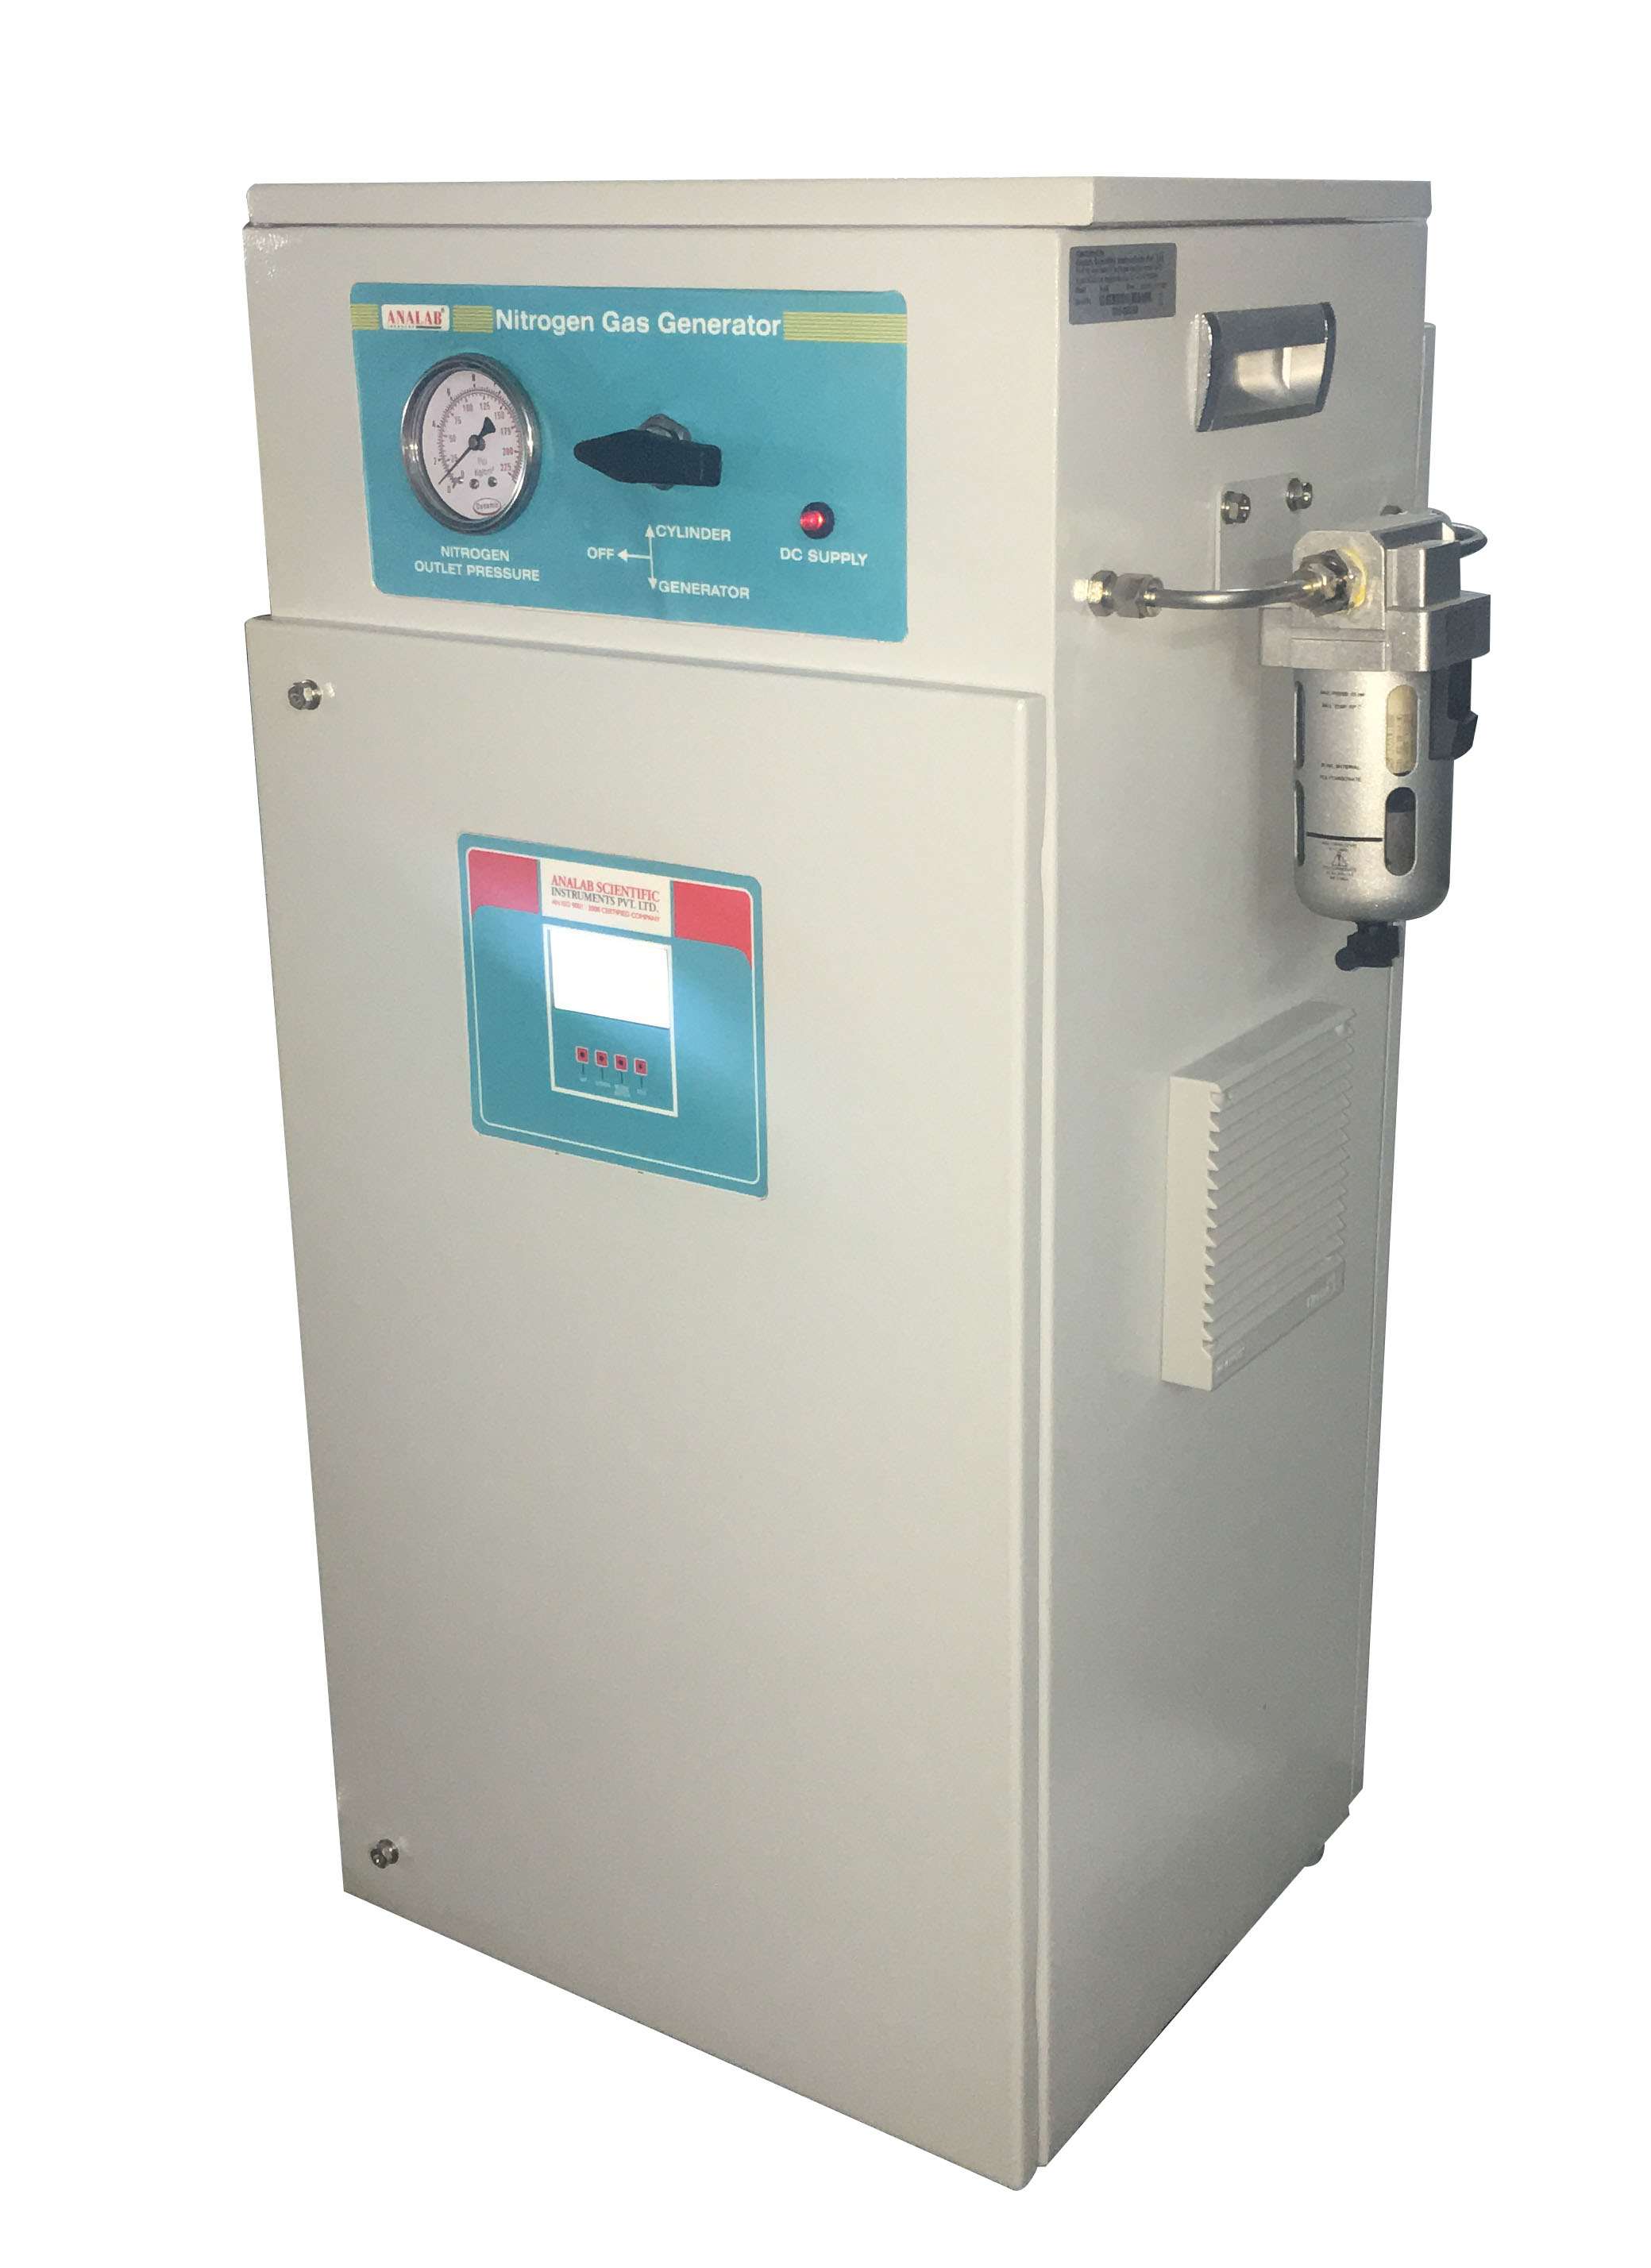 Nitrogen Gas Generator (without Air Compressor) - (Capacity : 40 liter/min - Purity of < 97 %)